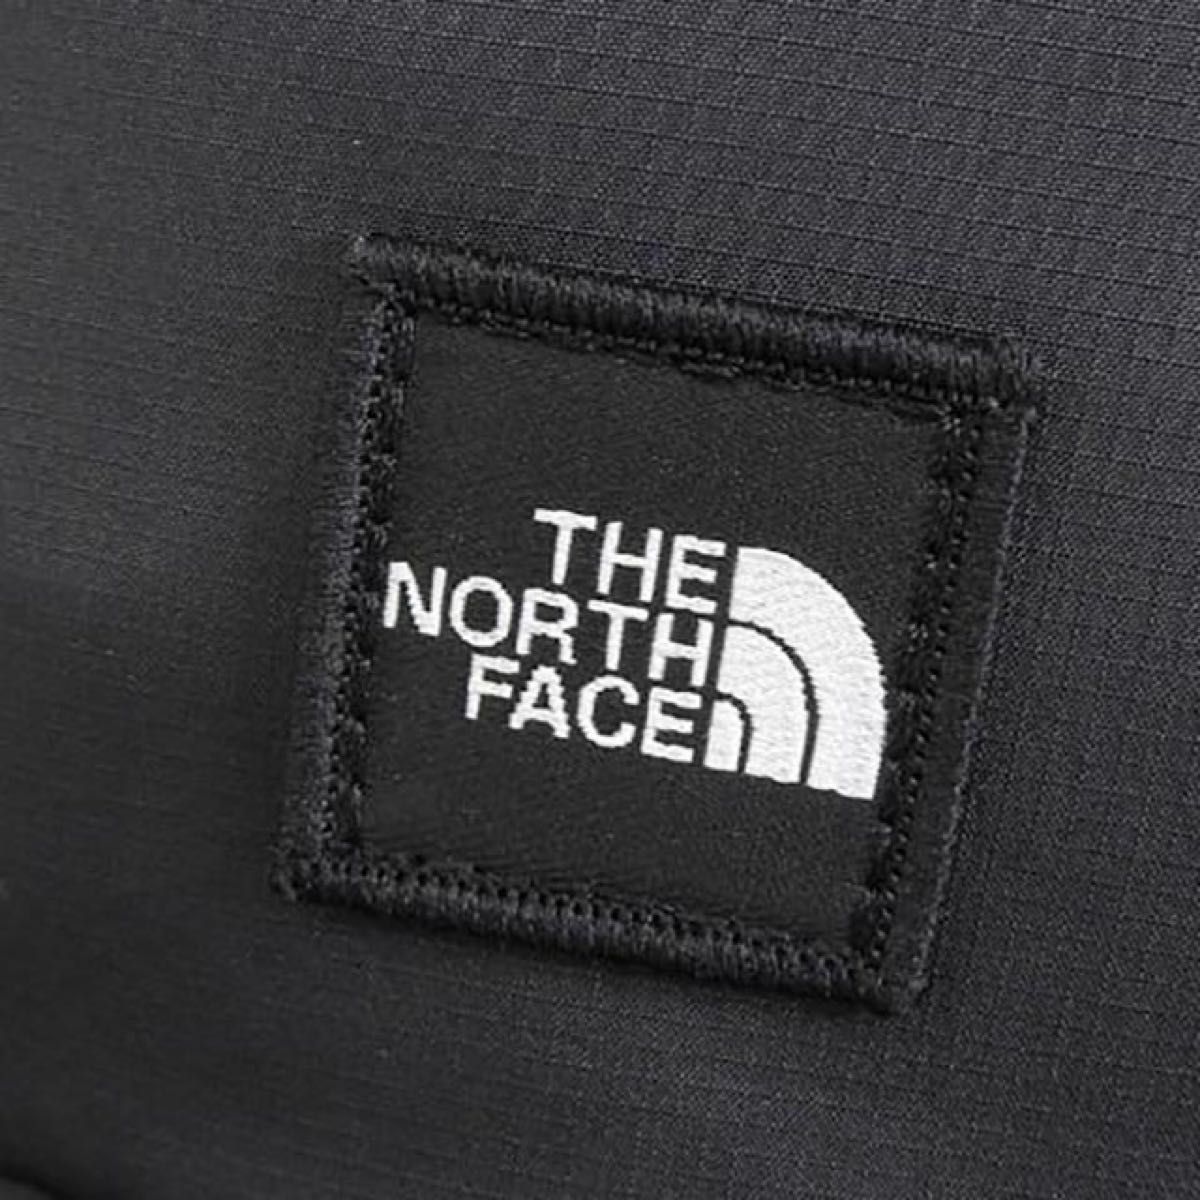 THE NORTH FACE キャップ ロゴ NF0A3SIH-JK3 ブラック